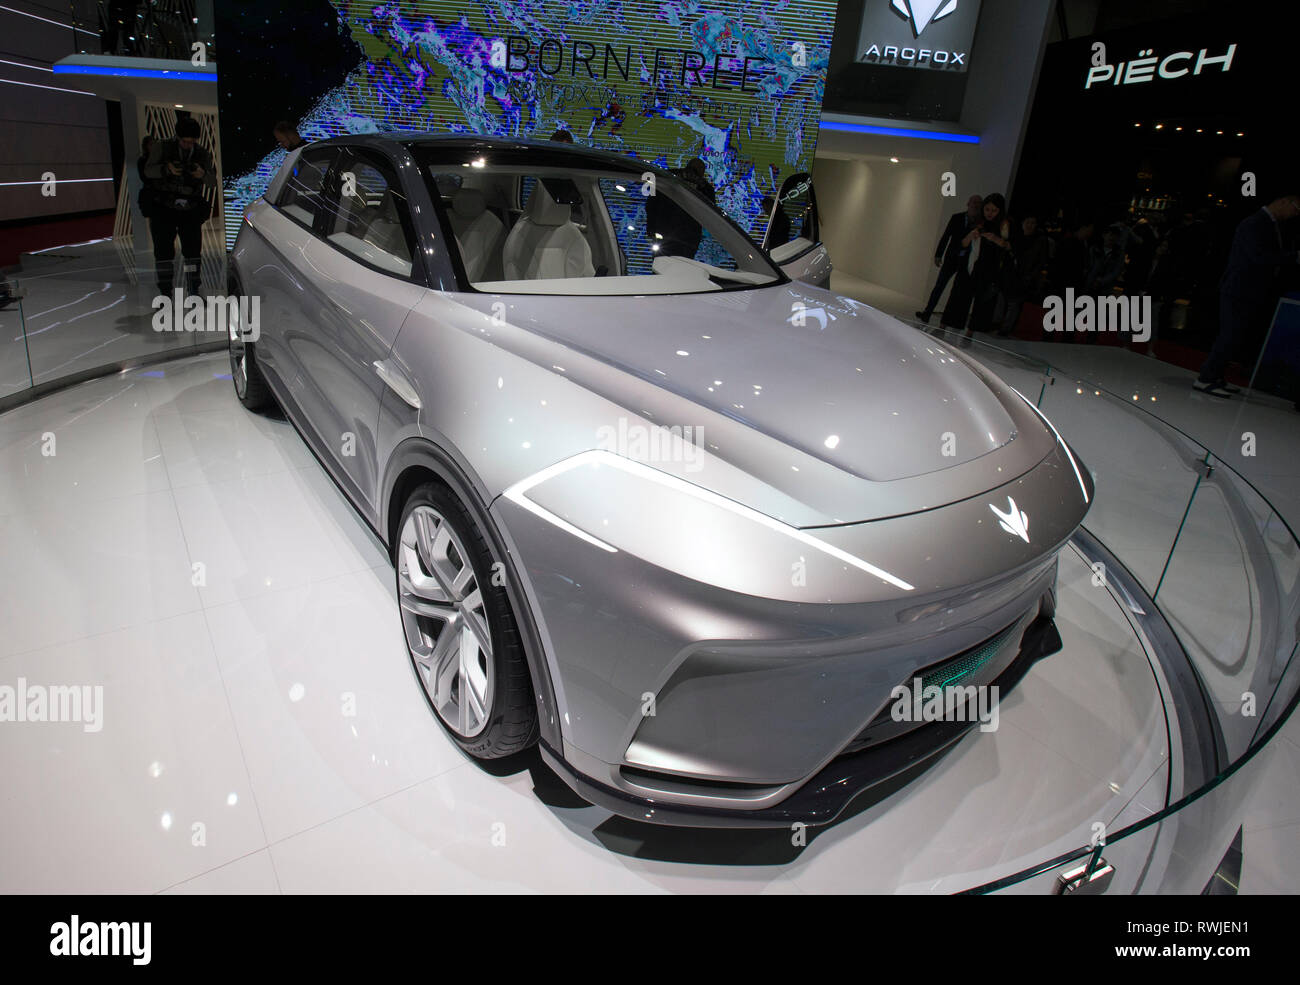 Geneva. 6th Mar, 2019. Photo taken on March 6, 2019 shows the Arcfox ECF Concept at the 89th Geneva International Motor Show in Geneva, Switzerland. Electric cars and hybrid cars are highlights at this year's Geneva International Motor Show, which will open to the public from March 7 to 17. Credit: Xu Jinquan/Xinhua/Alamy Live News Stock Photo